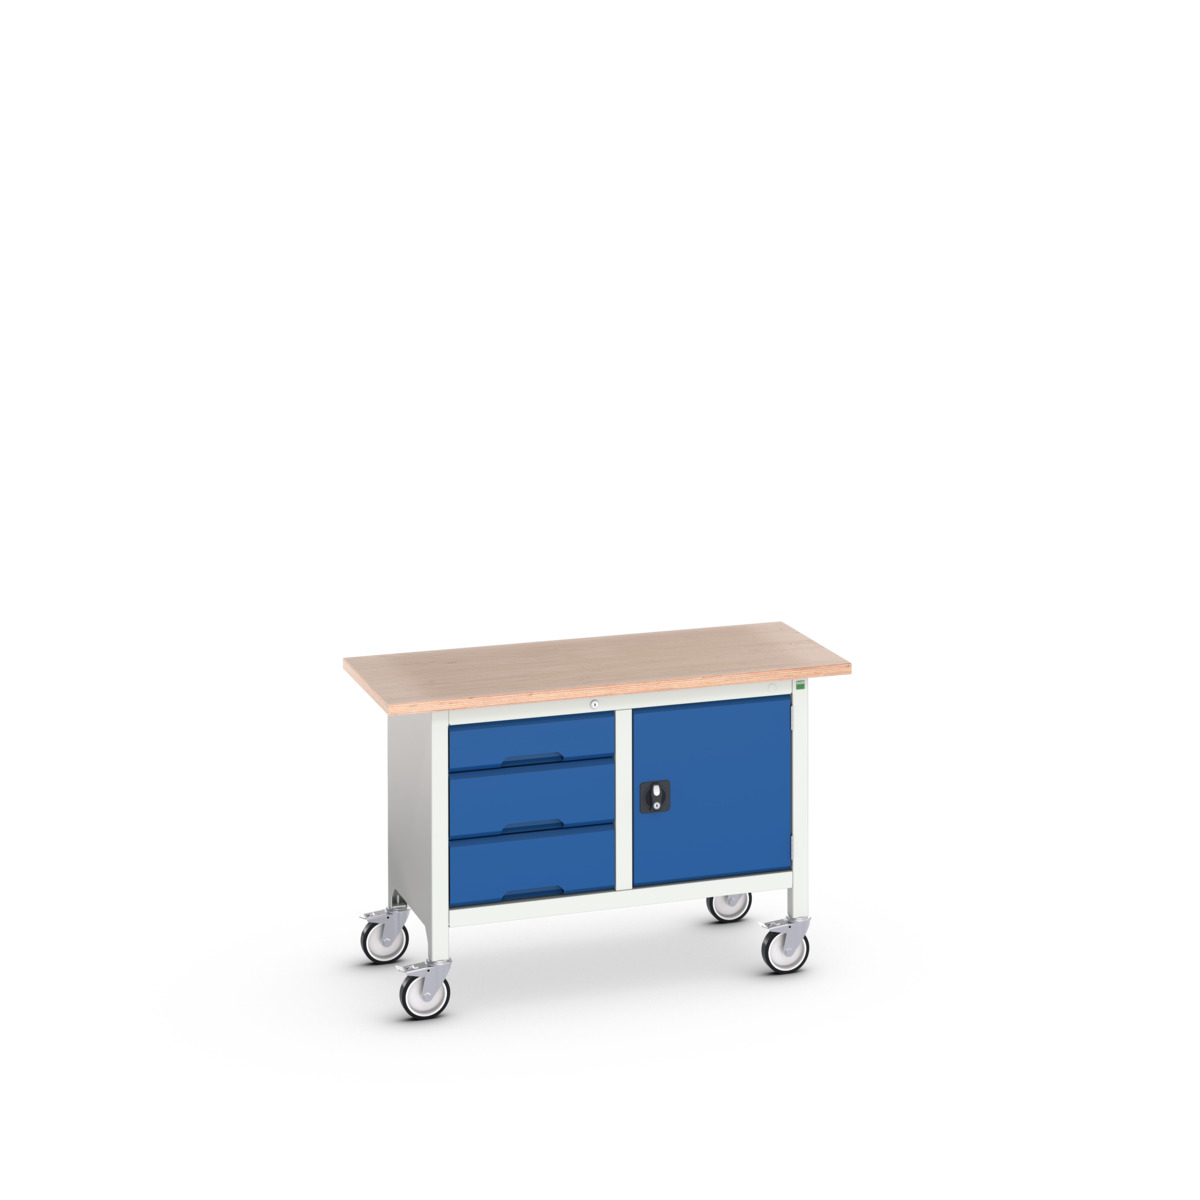 16923203.11 - verso mobile storage bench (mpx)